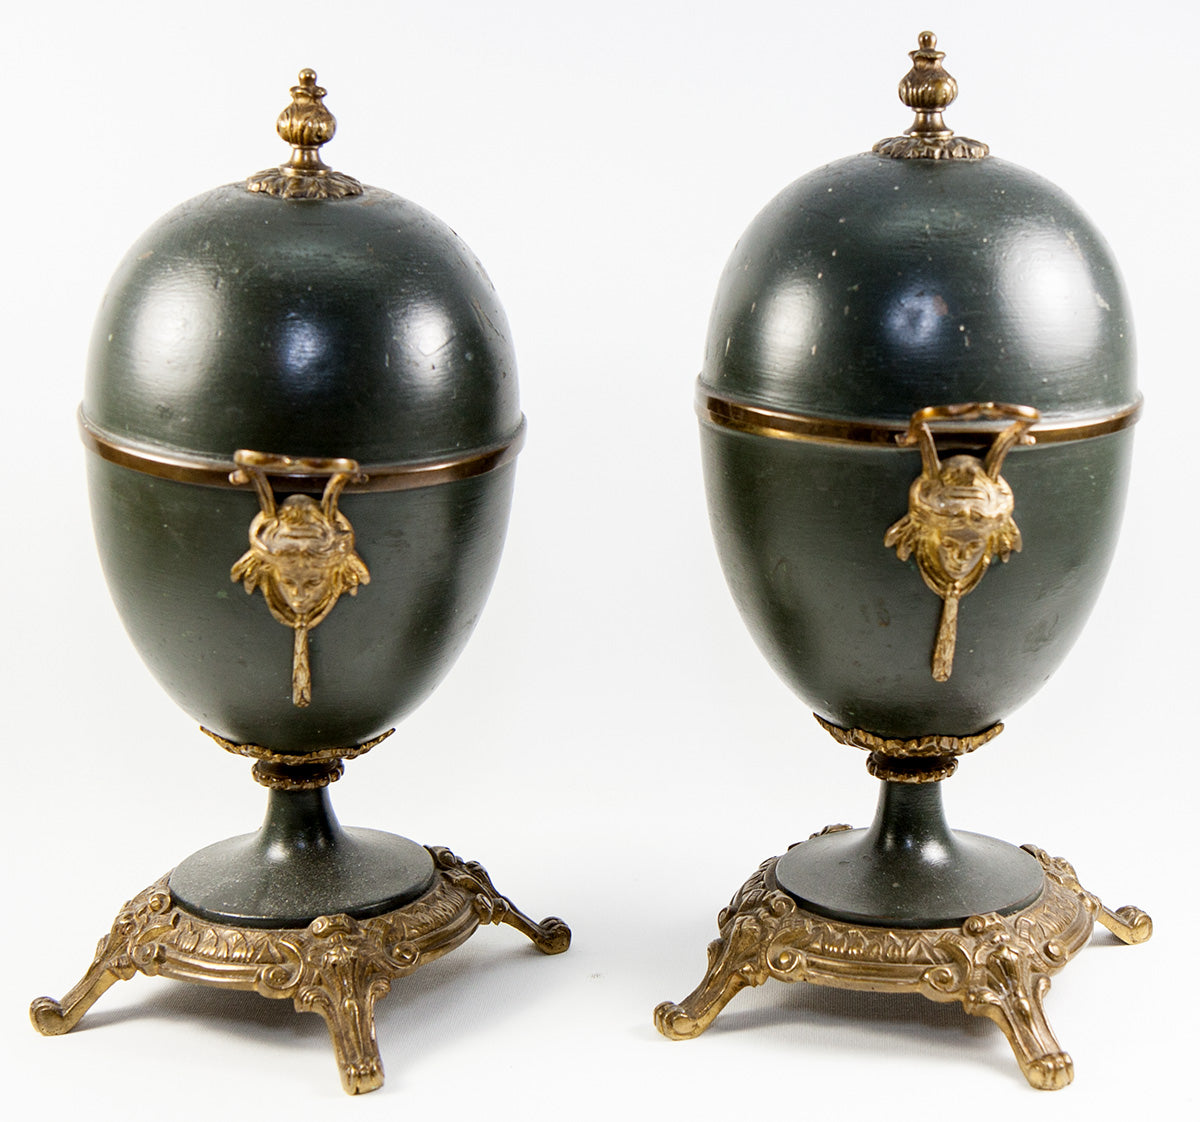 Pair of Napoleon III French Cassolets or Mantel Vase, Ornaments w Lids, Figural Handles